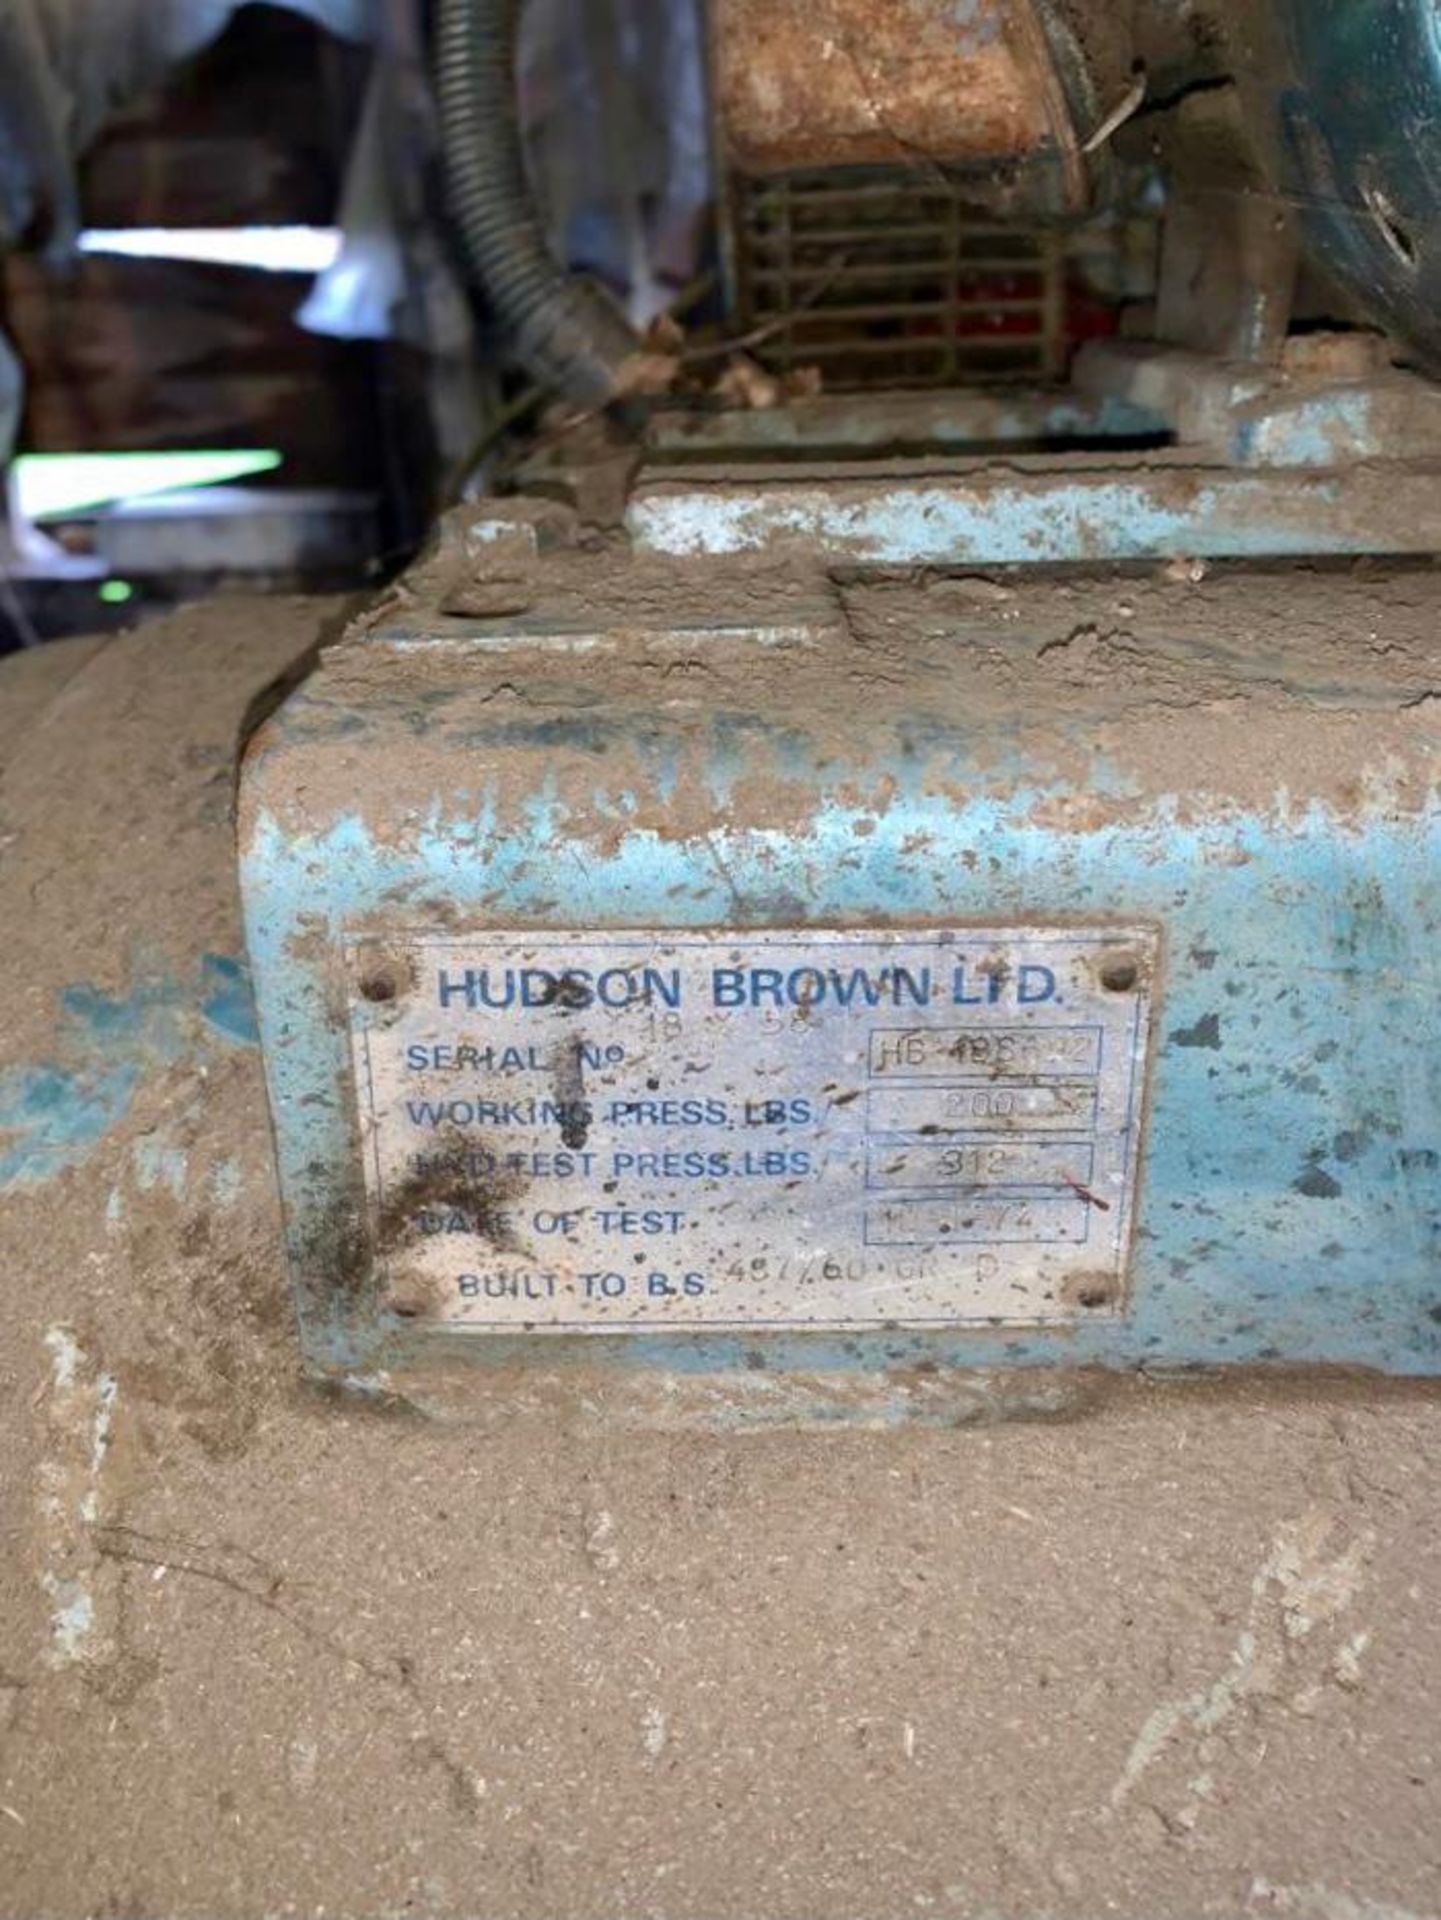 Hudson Brown Ltd Hacksaw - Spares and Repairs. Stored near Chatteris, Cambridgeshire. - Image 2 of 3